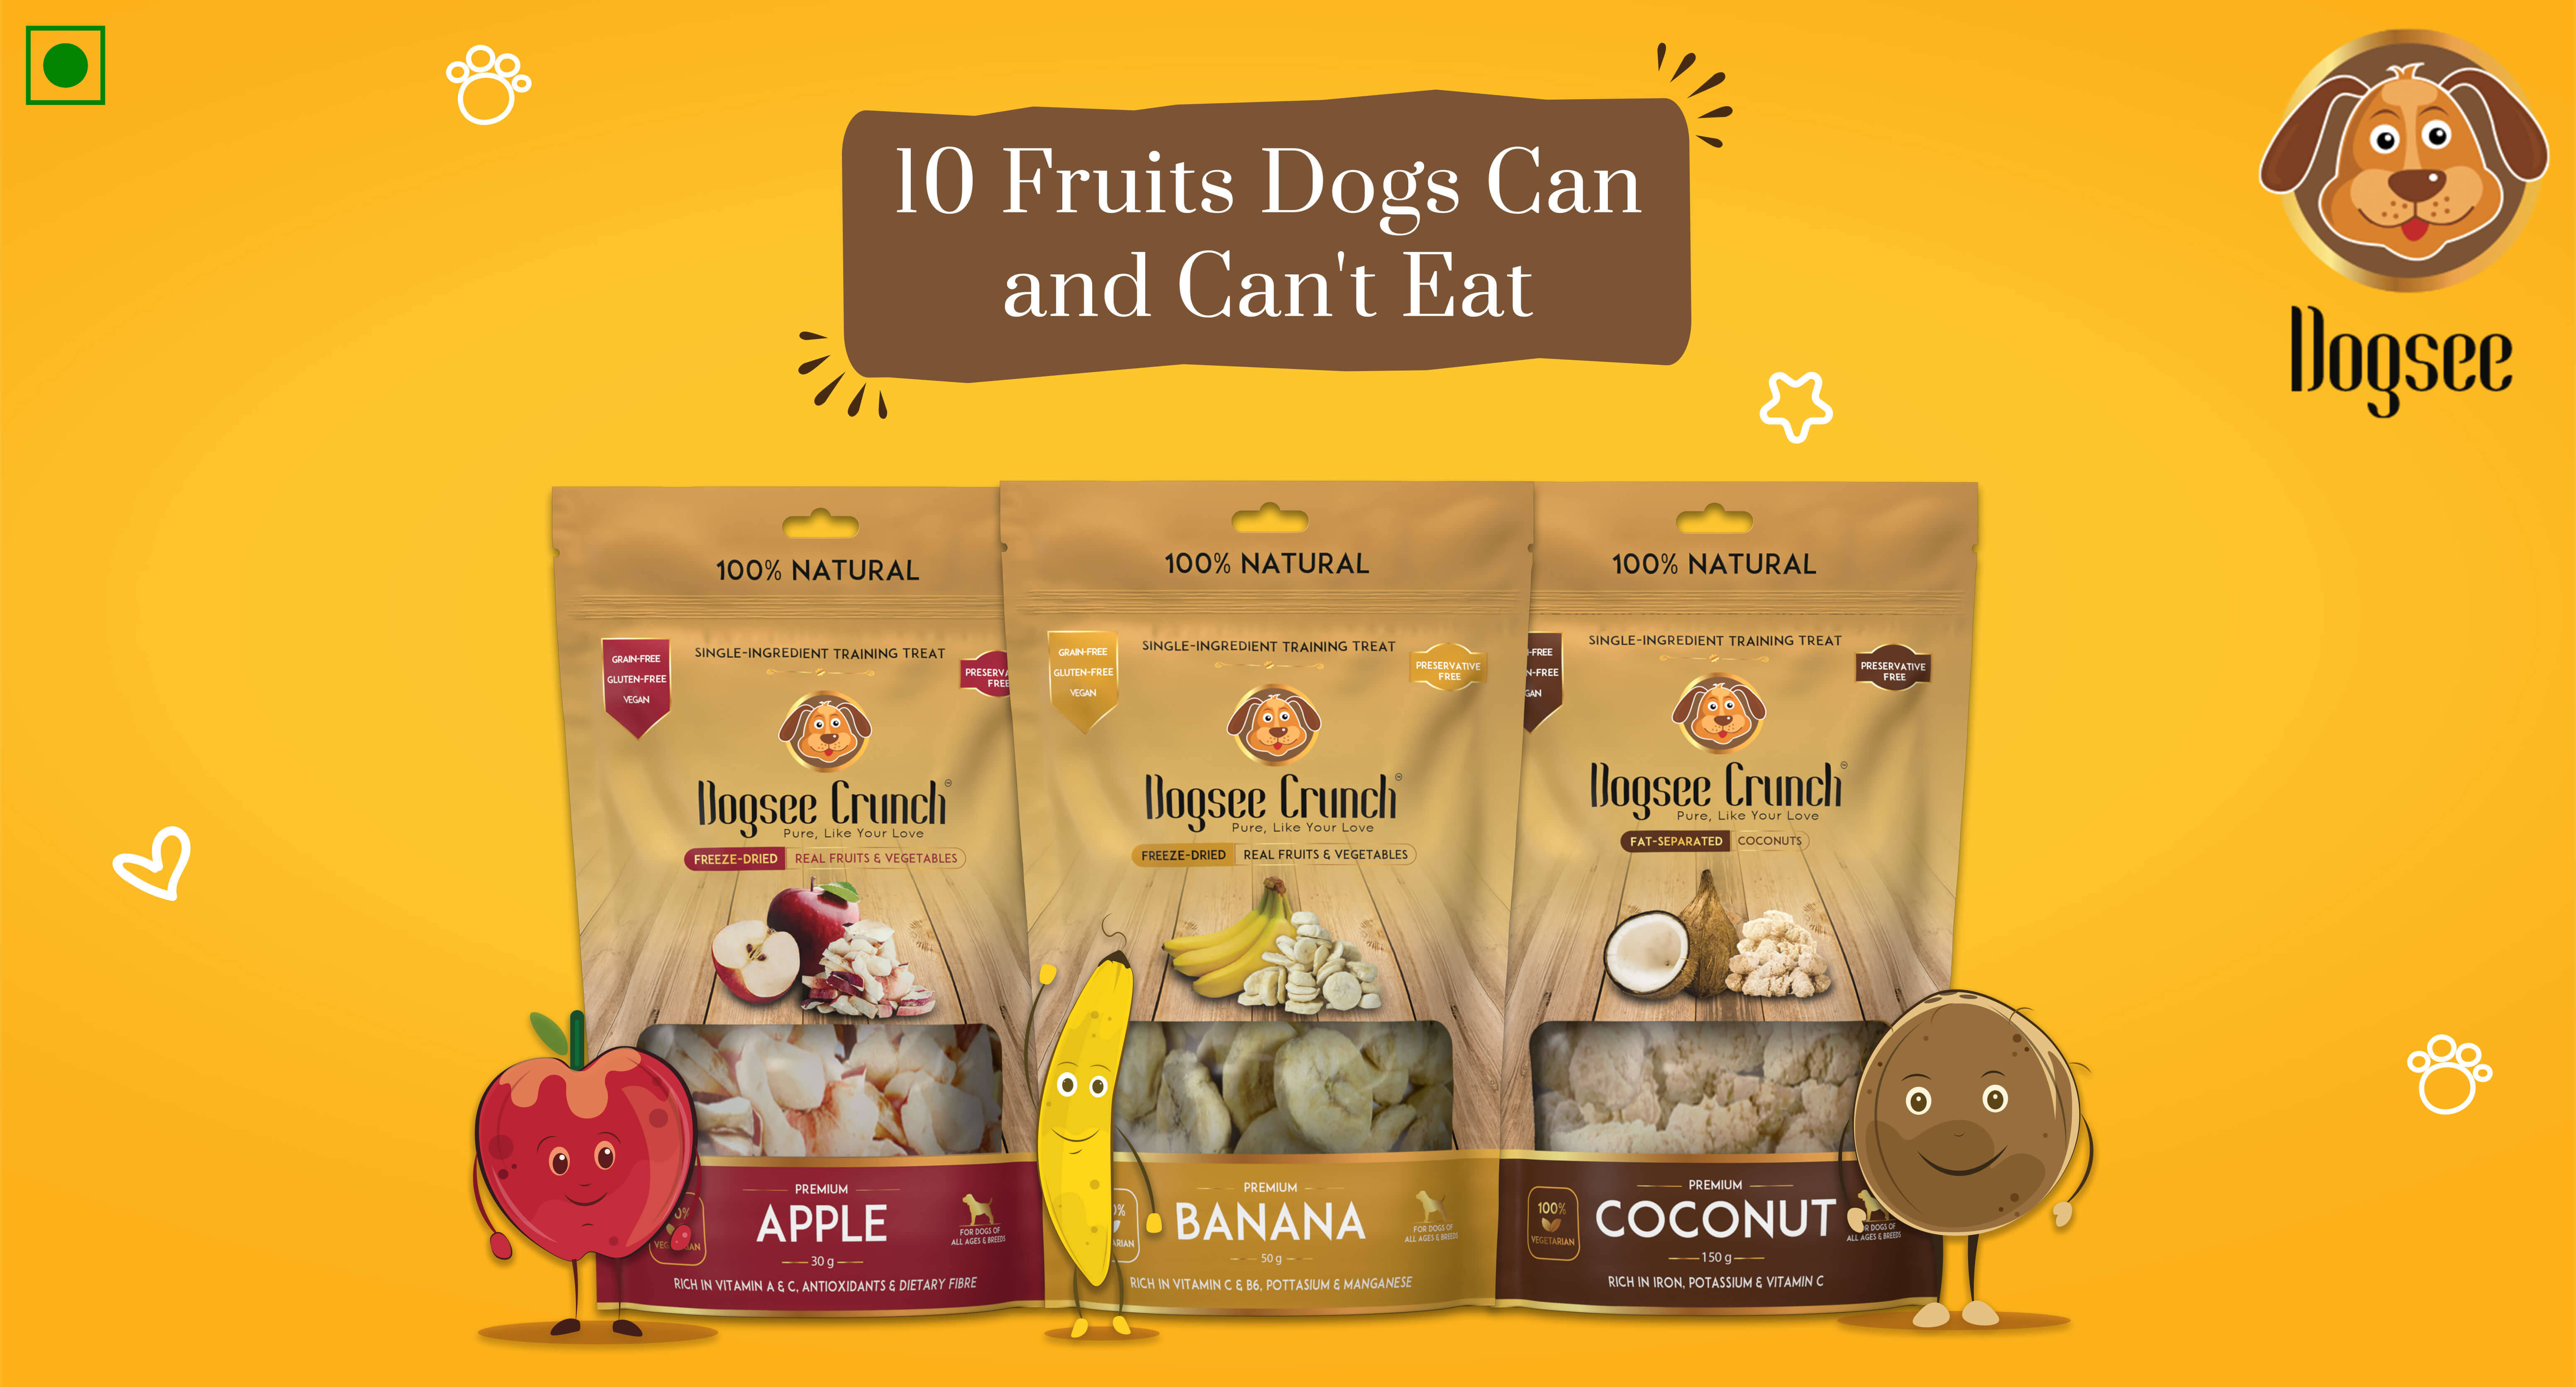 ﻿10 Fruits Dogs Can and Can't Eat